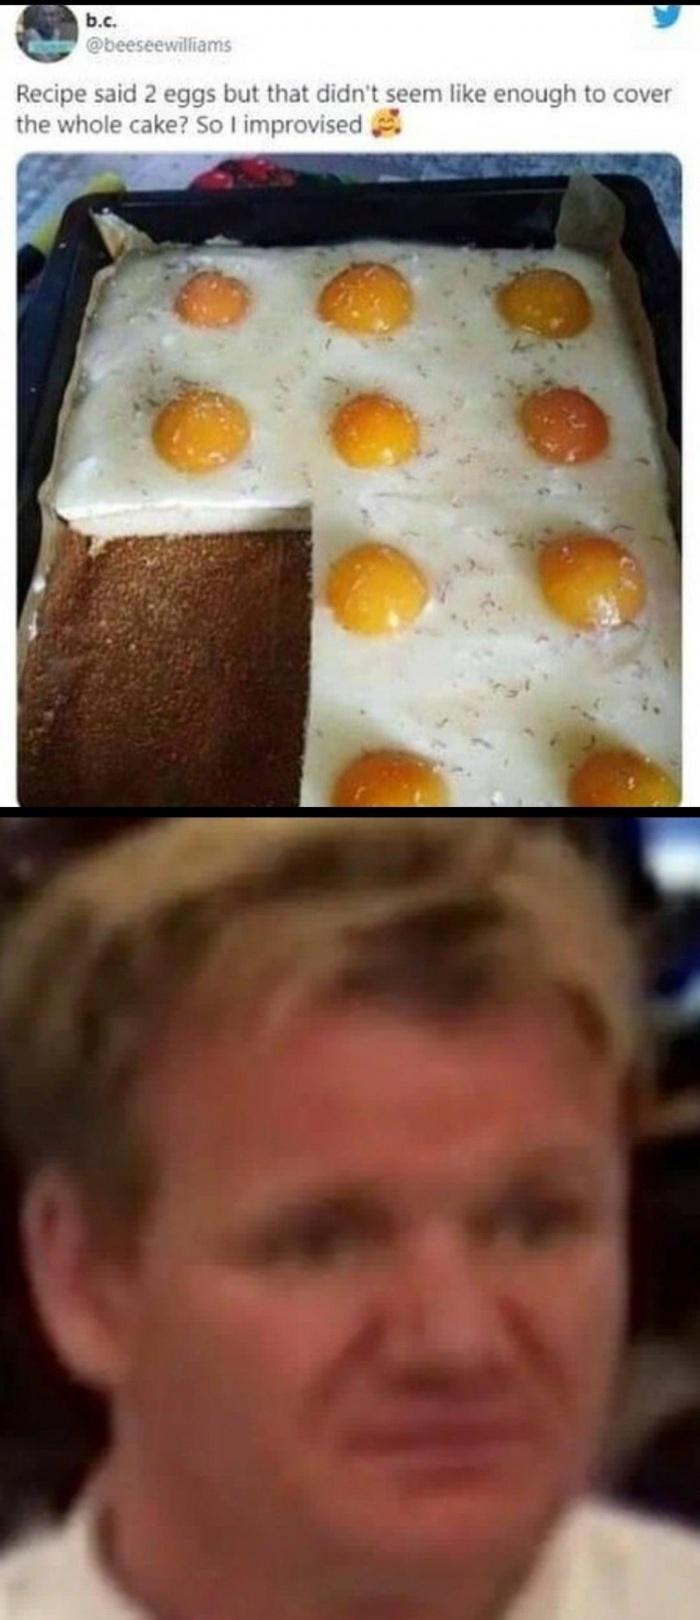 funny memes and pics - egg cake meme - b.c. Recipe said 2 eggs but that didn't seem enough to cover the whole cake? So I improvised